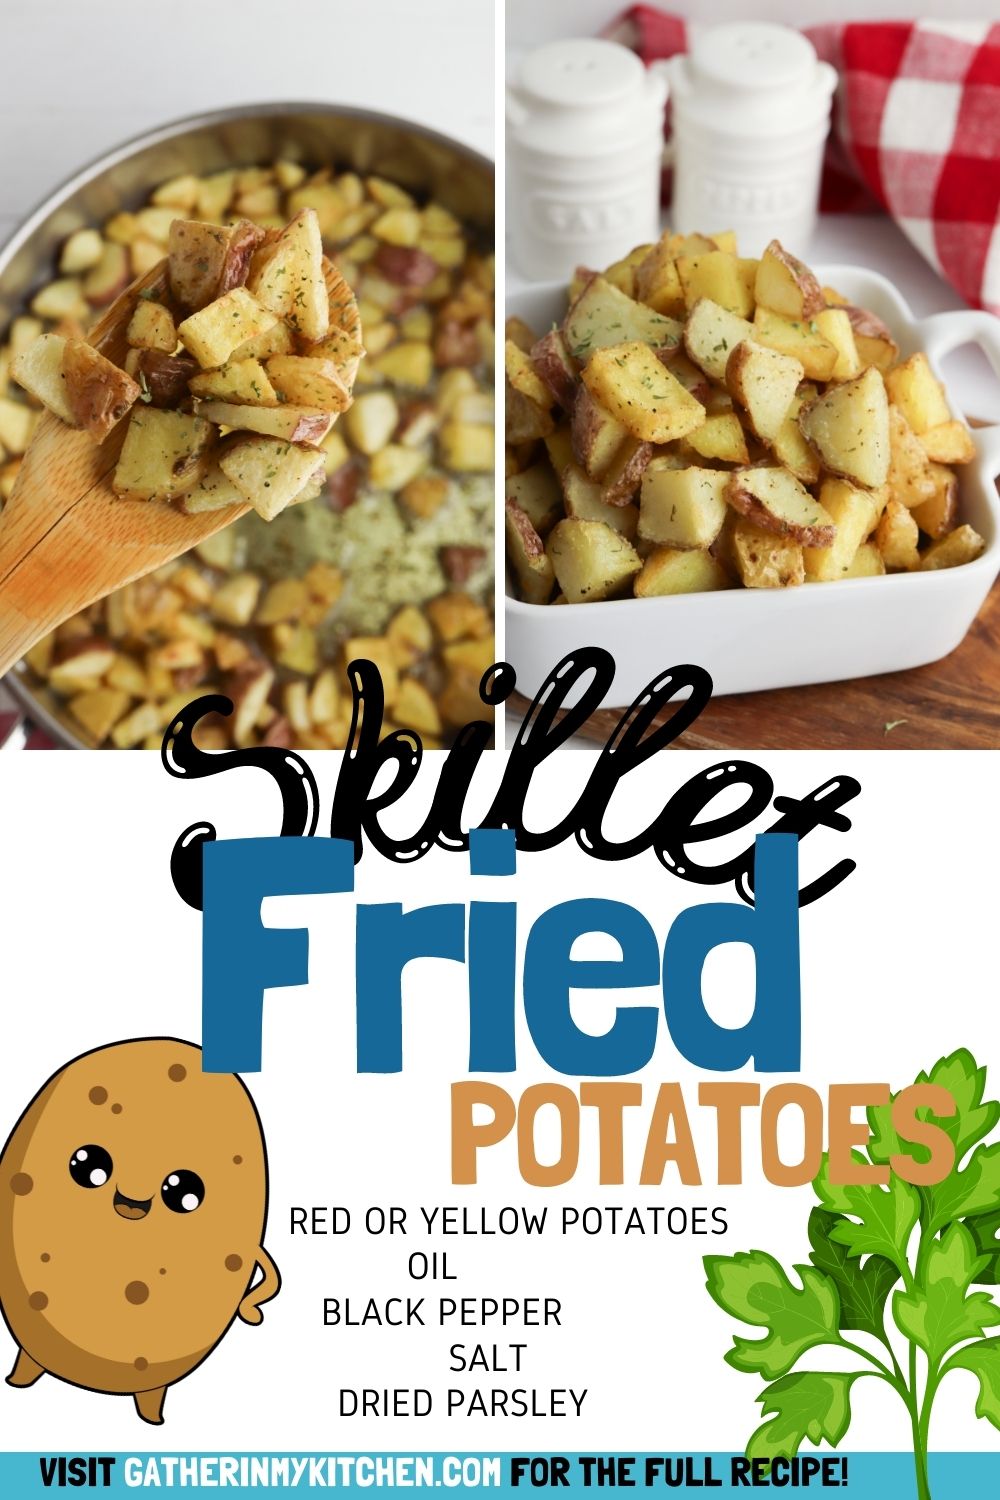 FB or PIn image: top left is a pan with fried potatoes, top right is a square dish with fried potatoes in it, beneath it says "skillet fried potatoes" with ingredients listed.